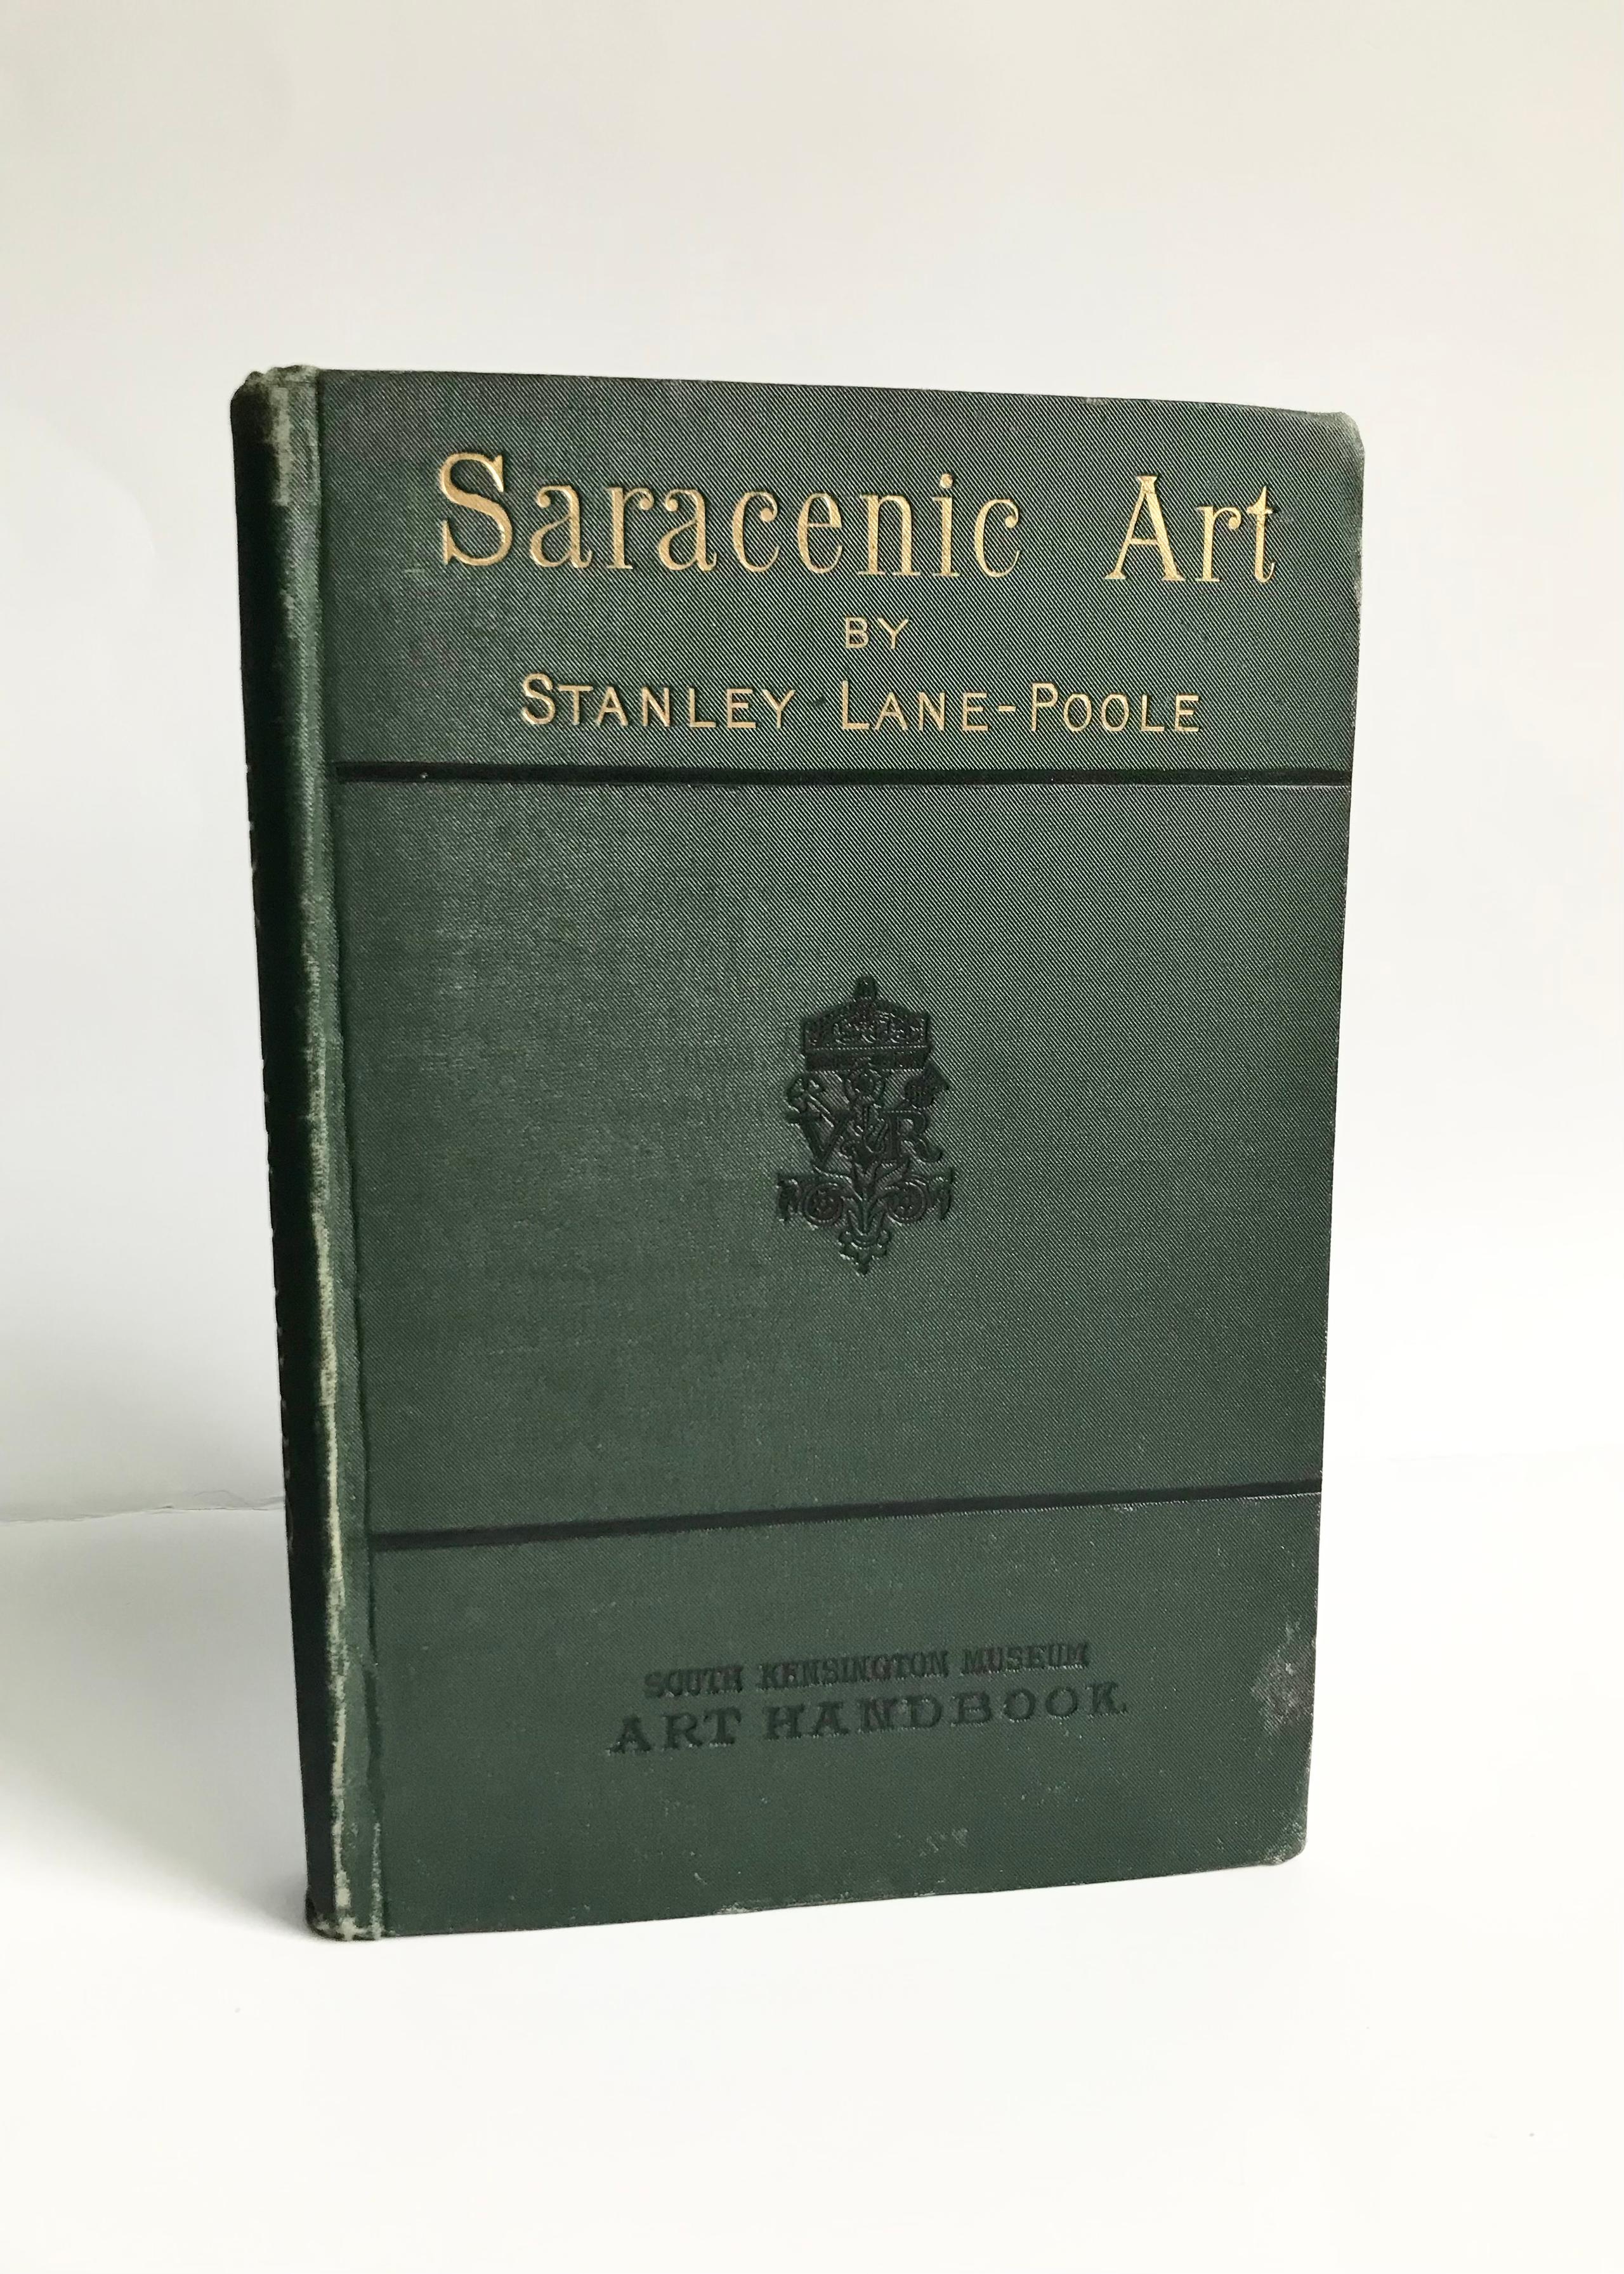 Saracenic Art, The Art of The Saracens In Egypt by Stanley Lane-Poole